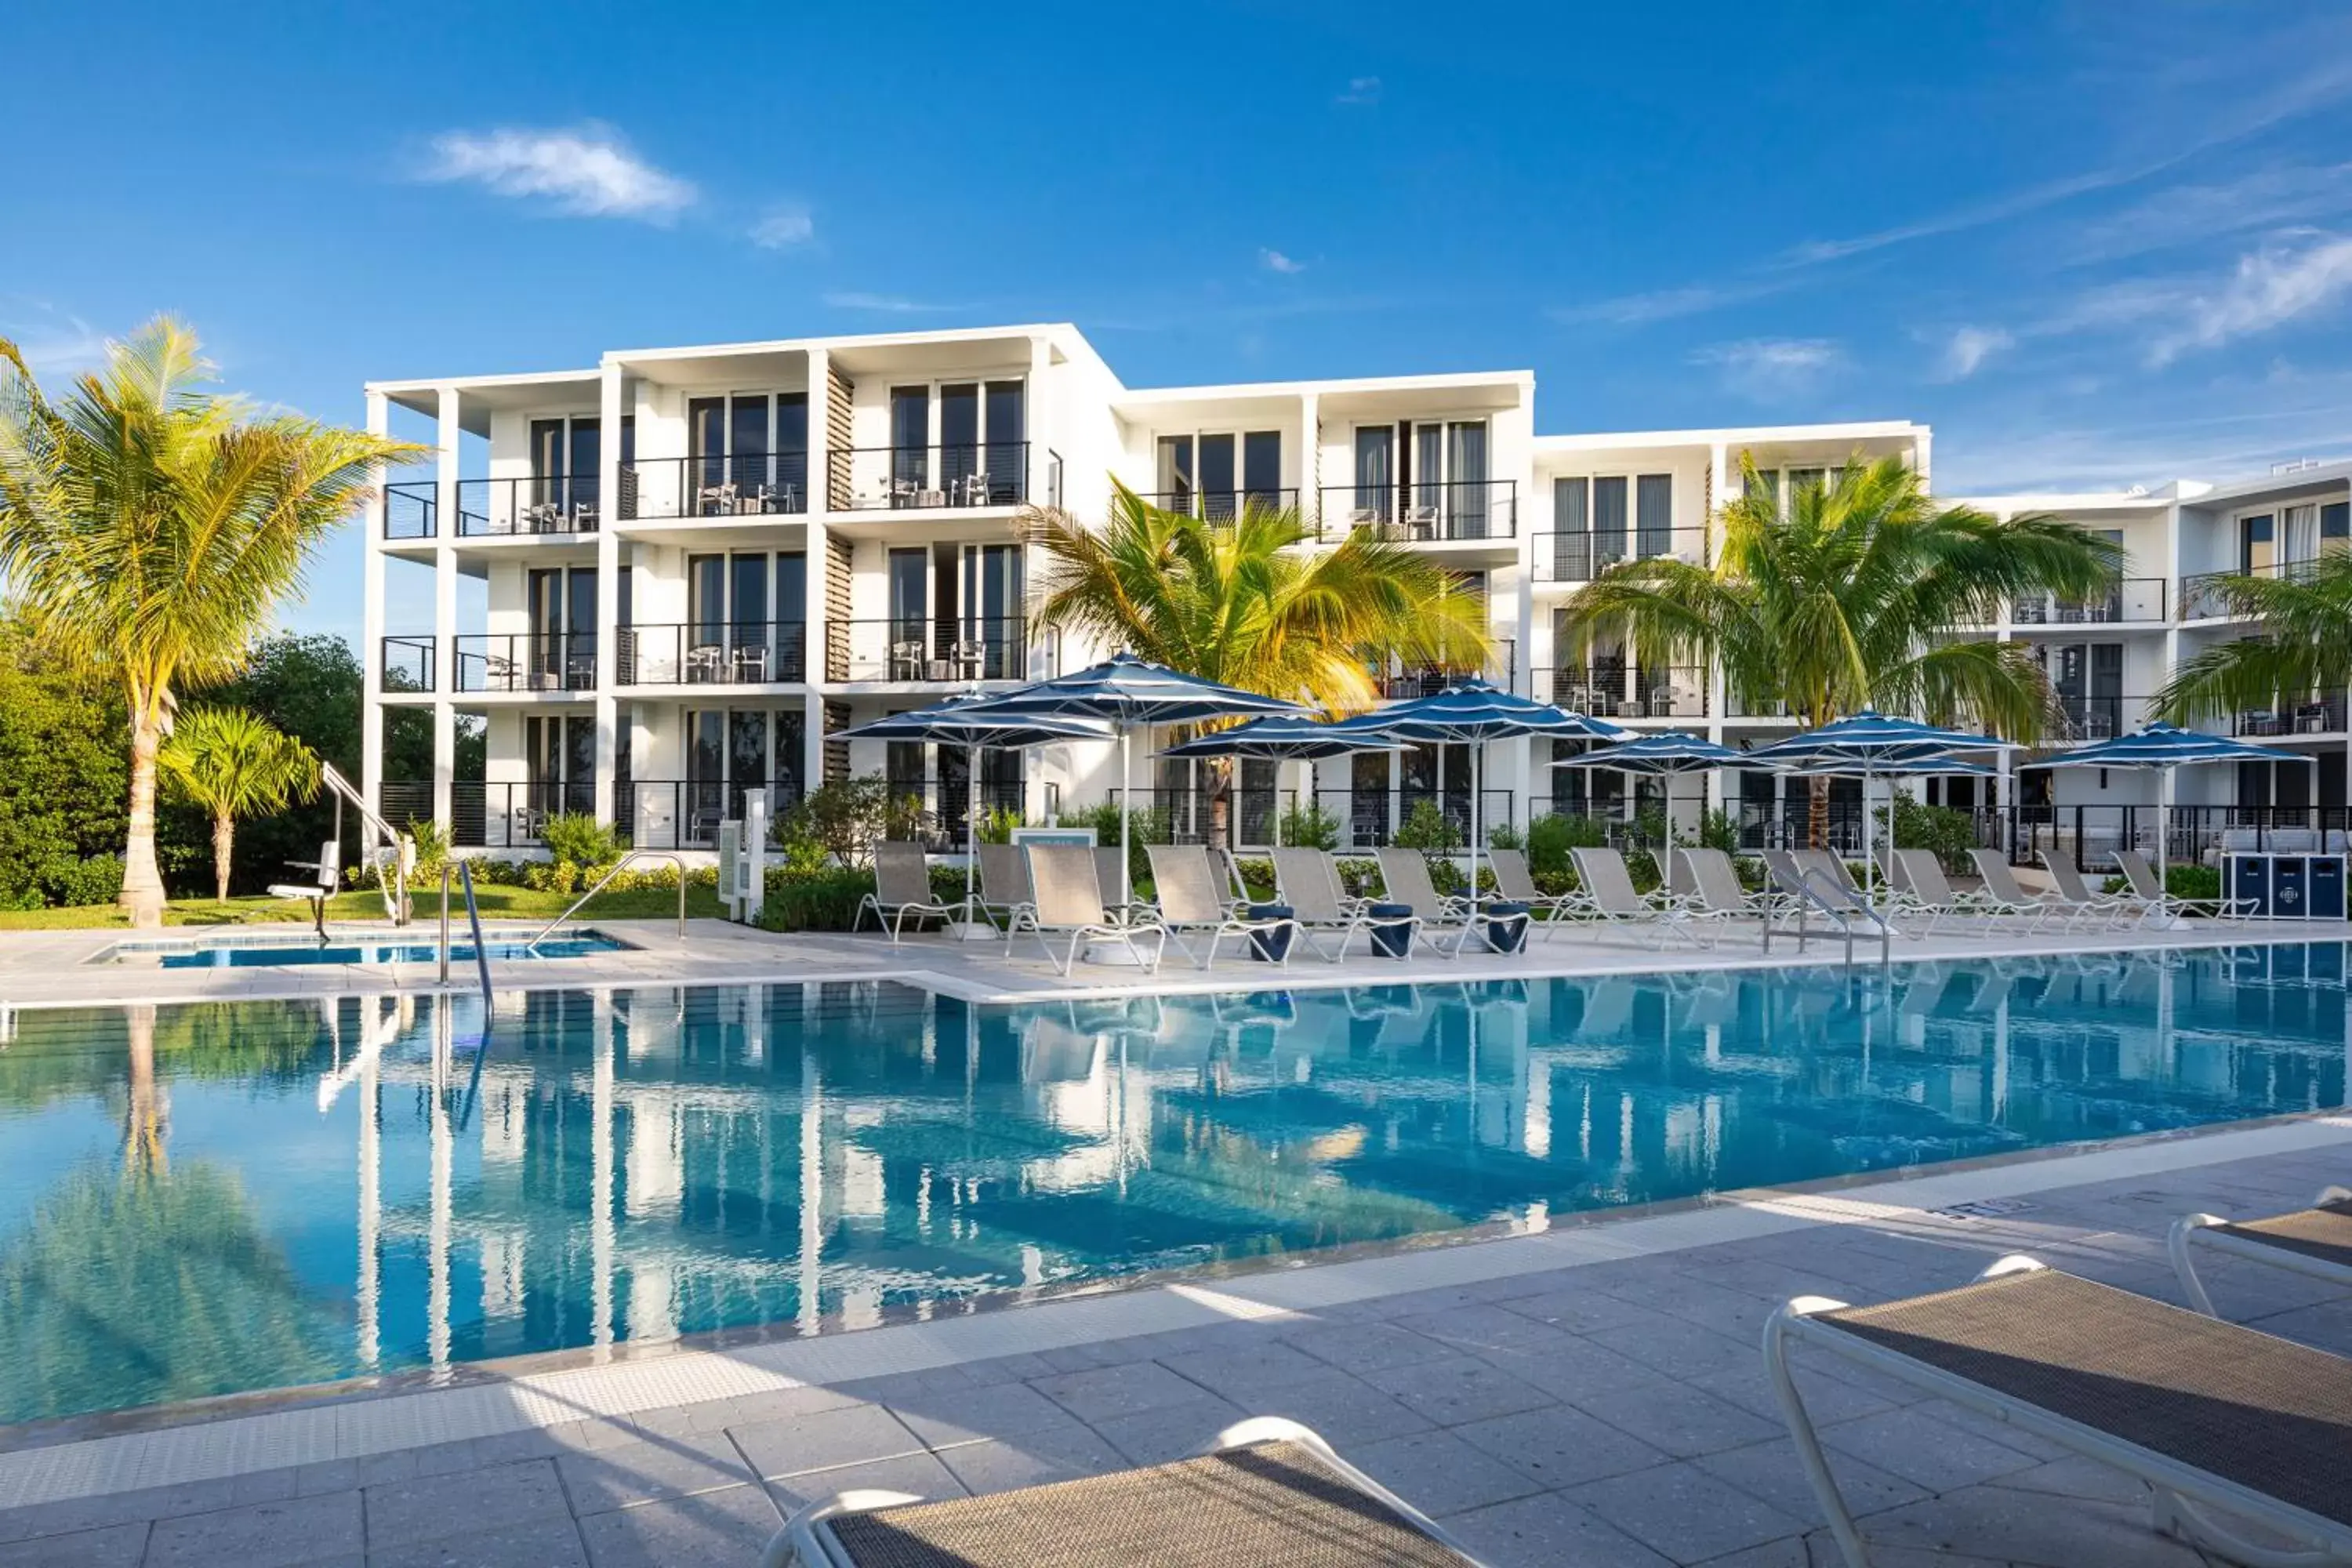 Property building, Swimming Pool in The Capitana Key West